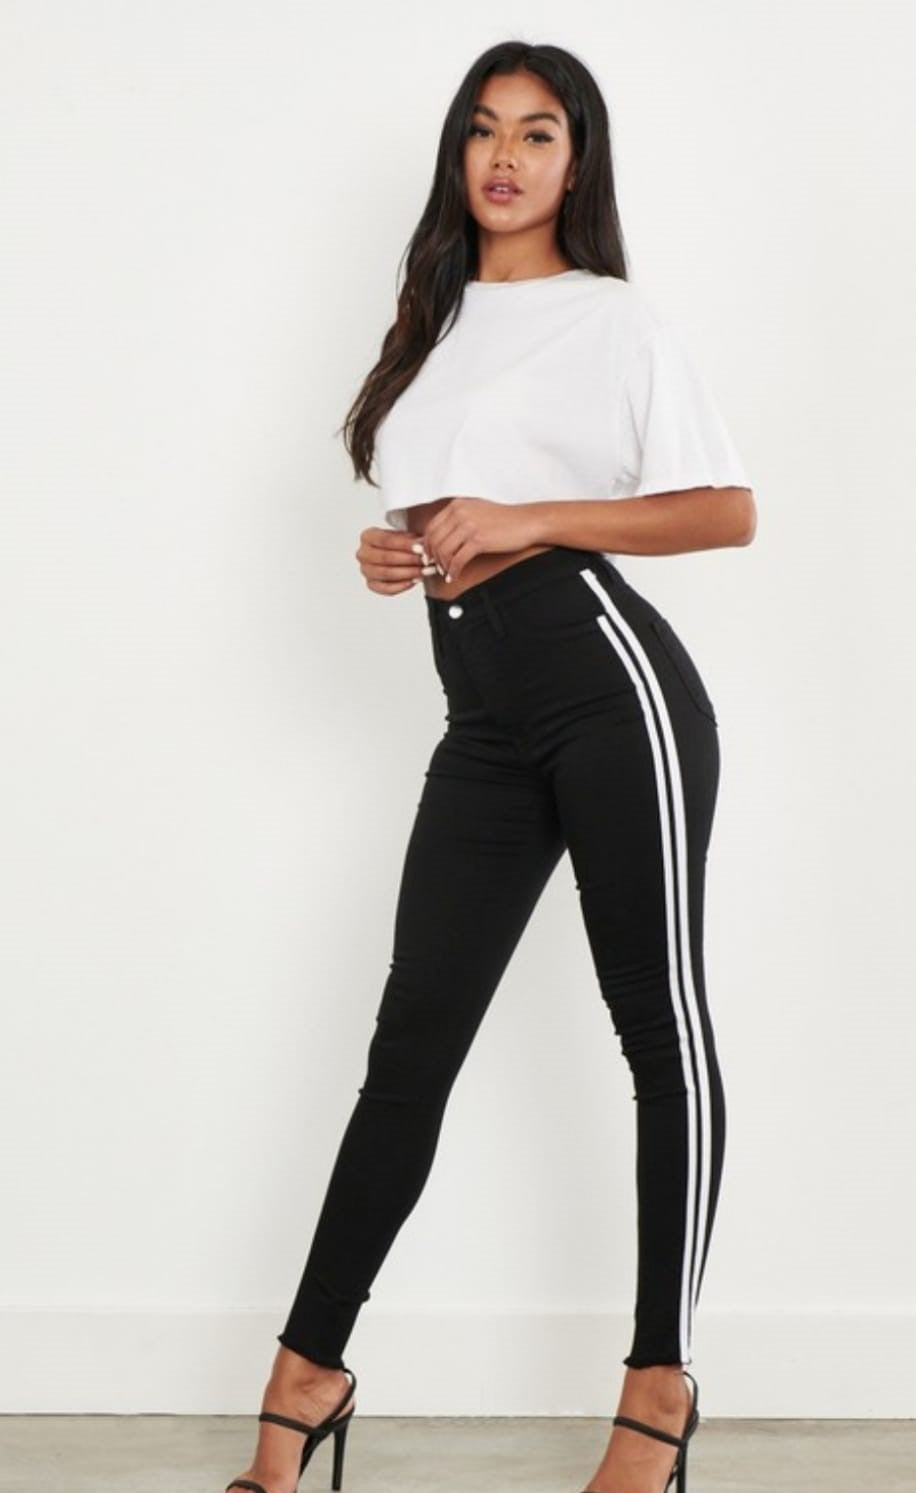 Flex your style in these cute black skinny Jeans with a contrast white stripe designs. Perfect for styling any and every way you want! These jeans come in a high rise fit featuring a raw uneven hem ends, zip and button closure. Pair with a graphic tee or chic fashion top, high heels or combat boots and of course a handbag for a complete look!